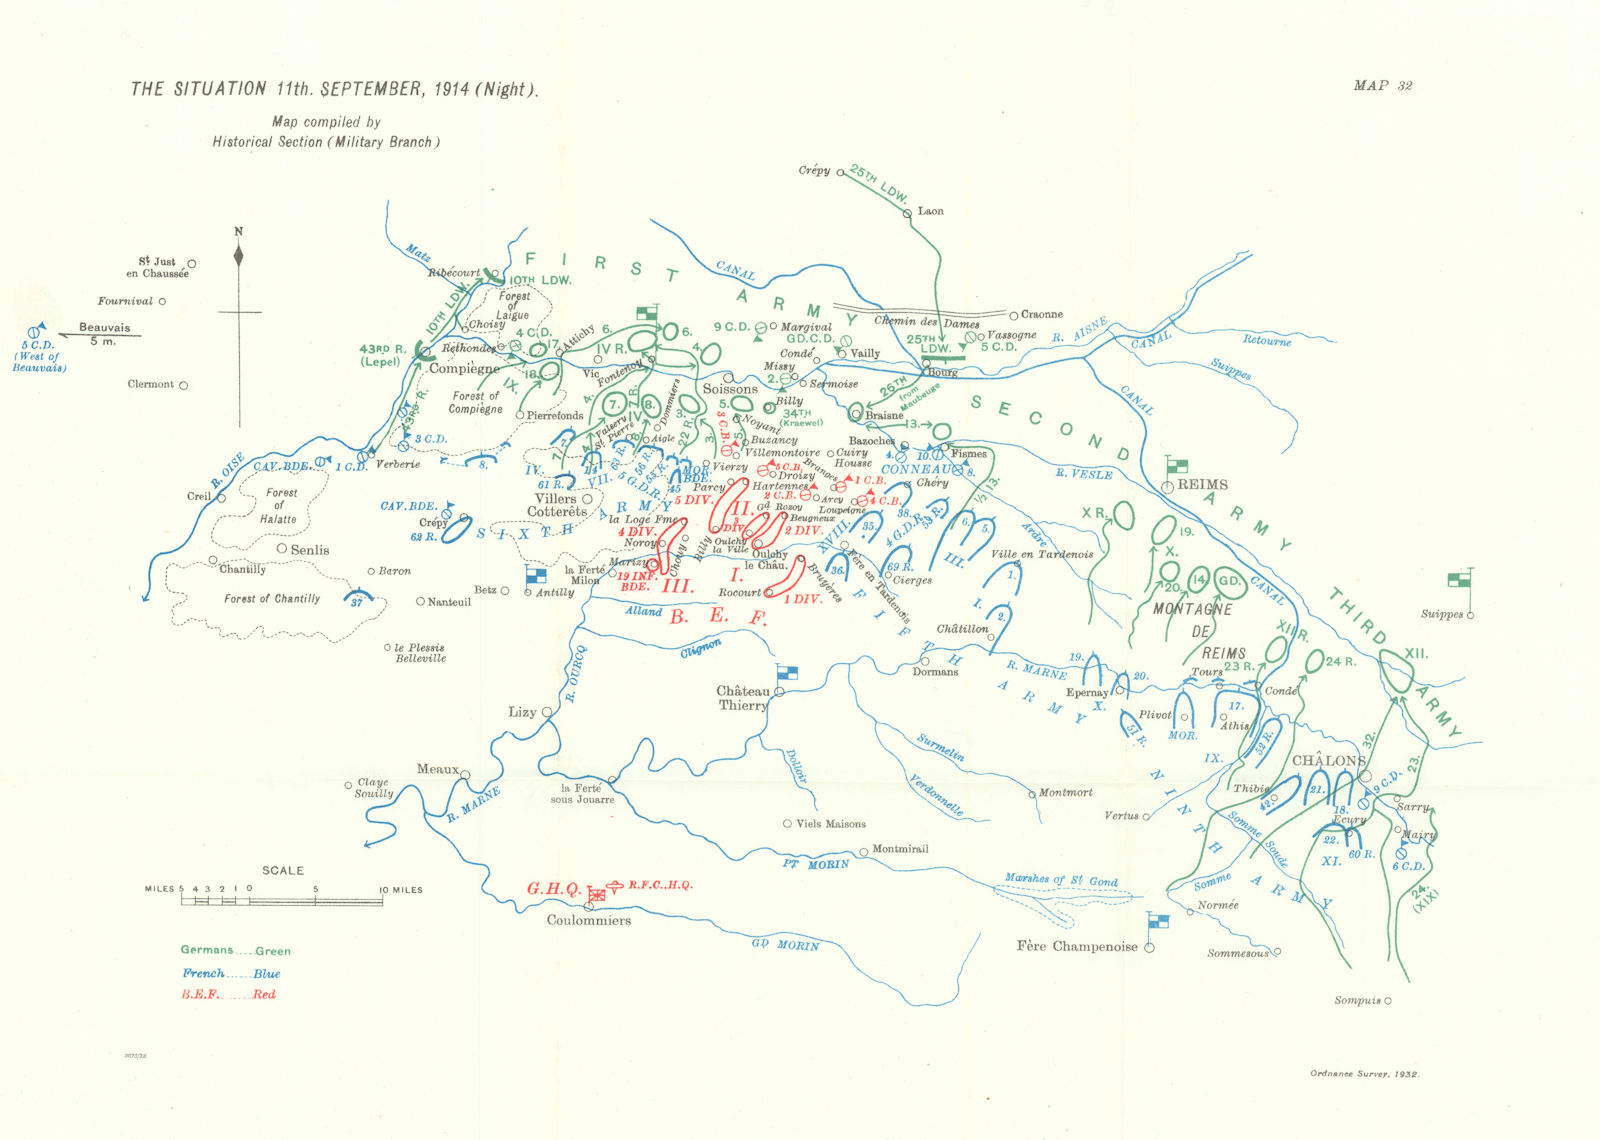 Battle of the Marne. Situation 11th September, 1914 night. WW1. 1933 old map